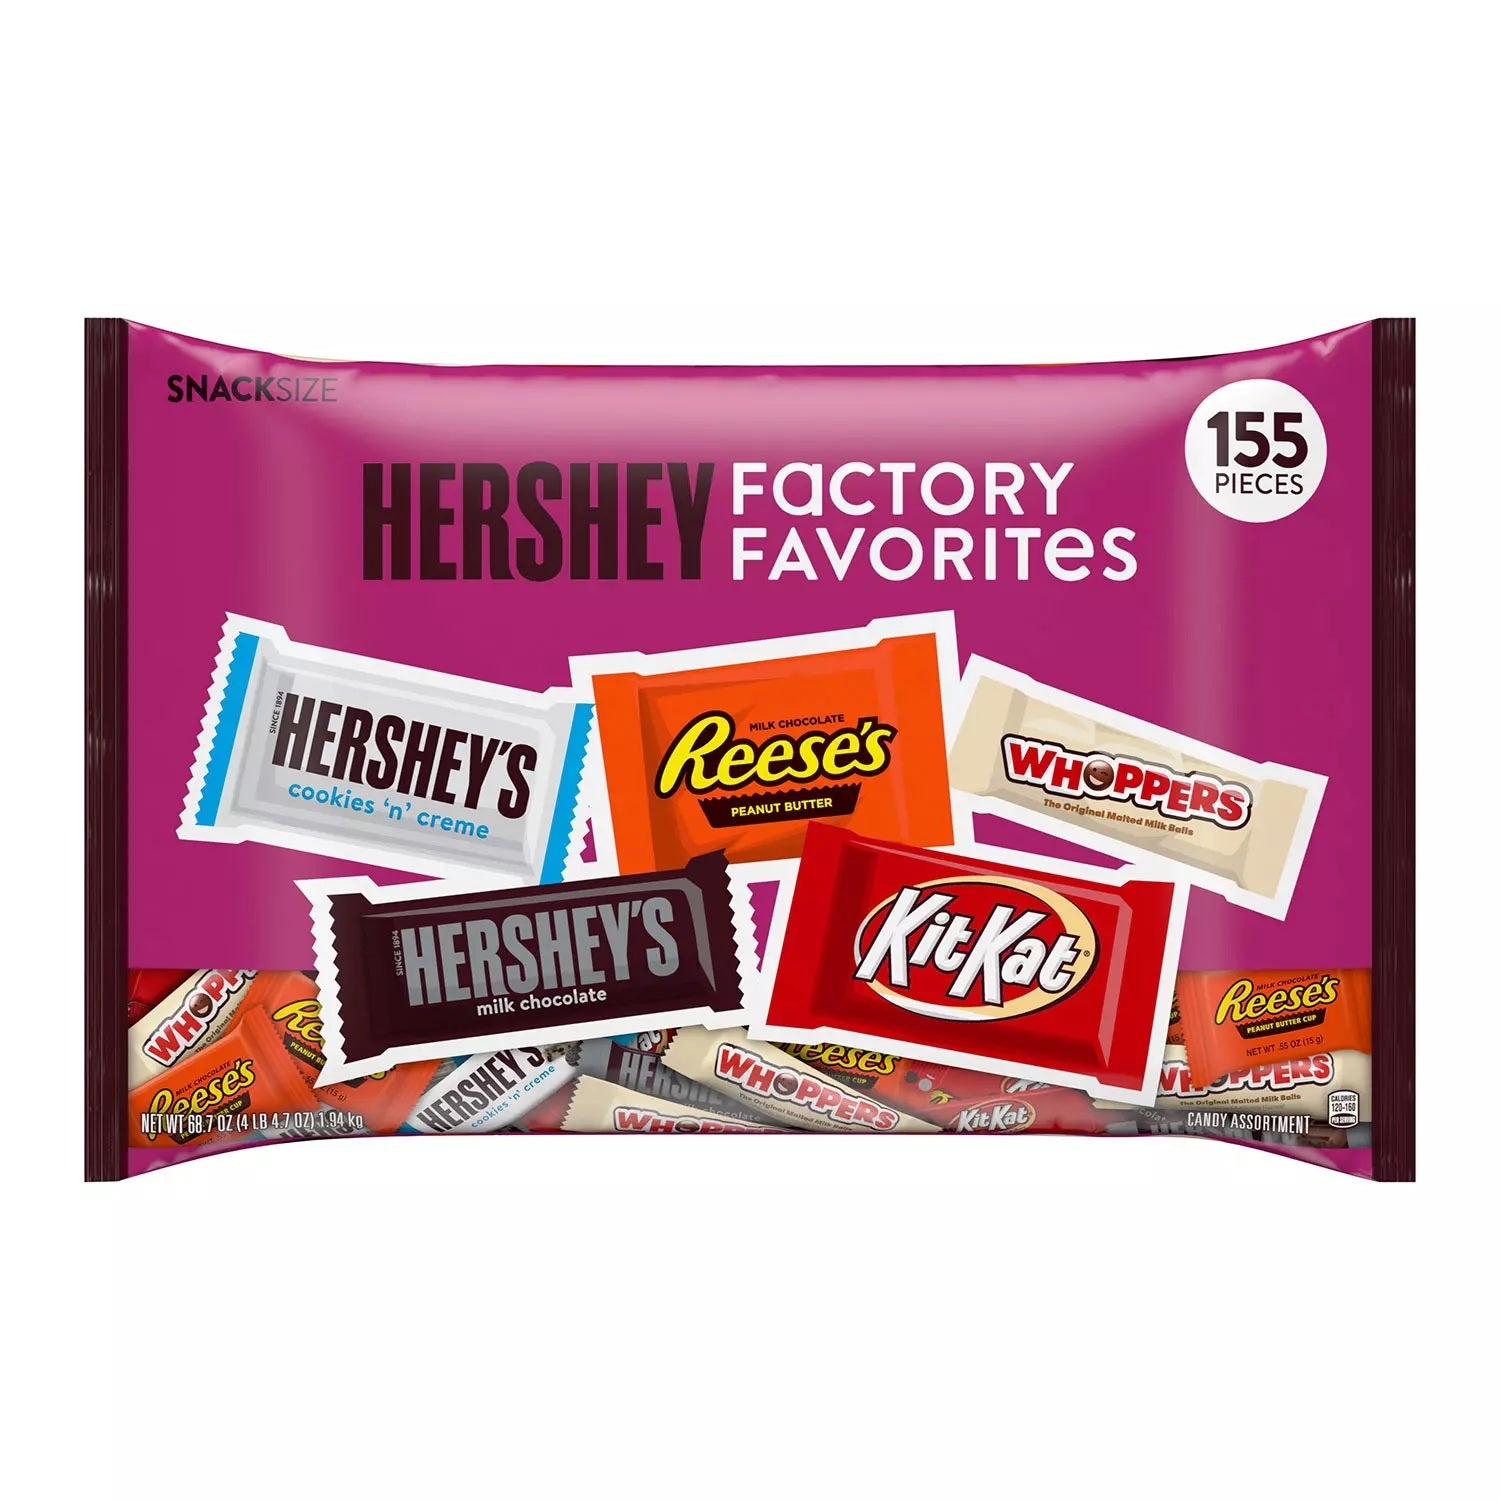 Hershey Factory Favorites Chocolate and Creme Assortment Snack Size Candy - 155ct/1pk